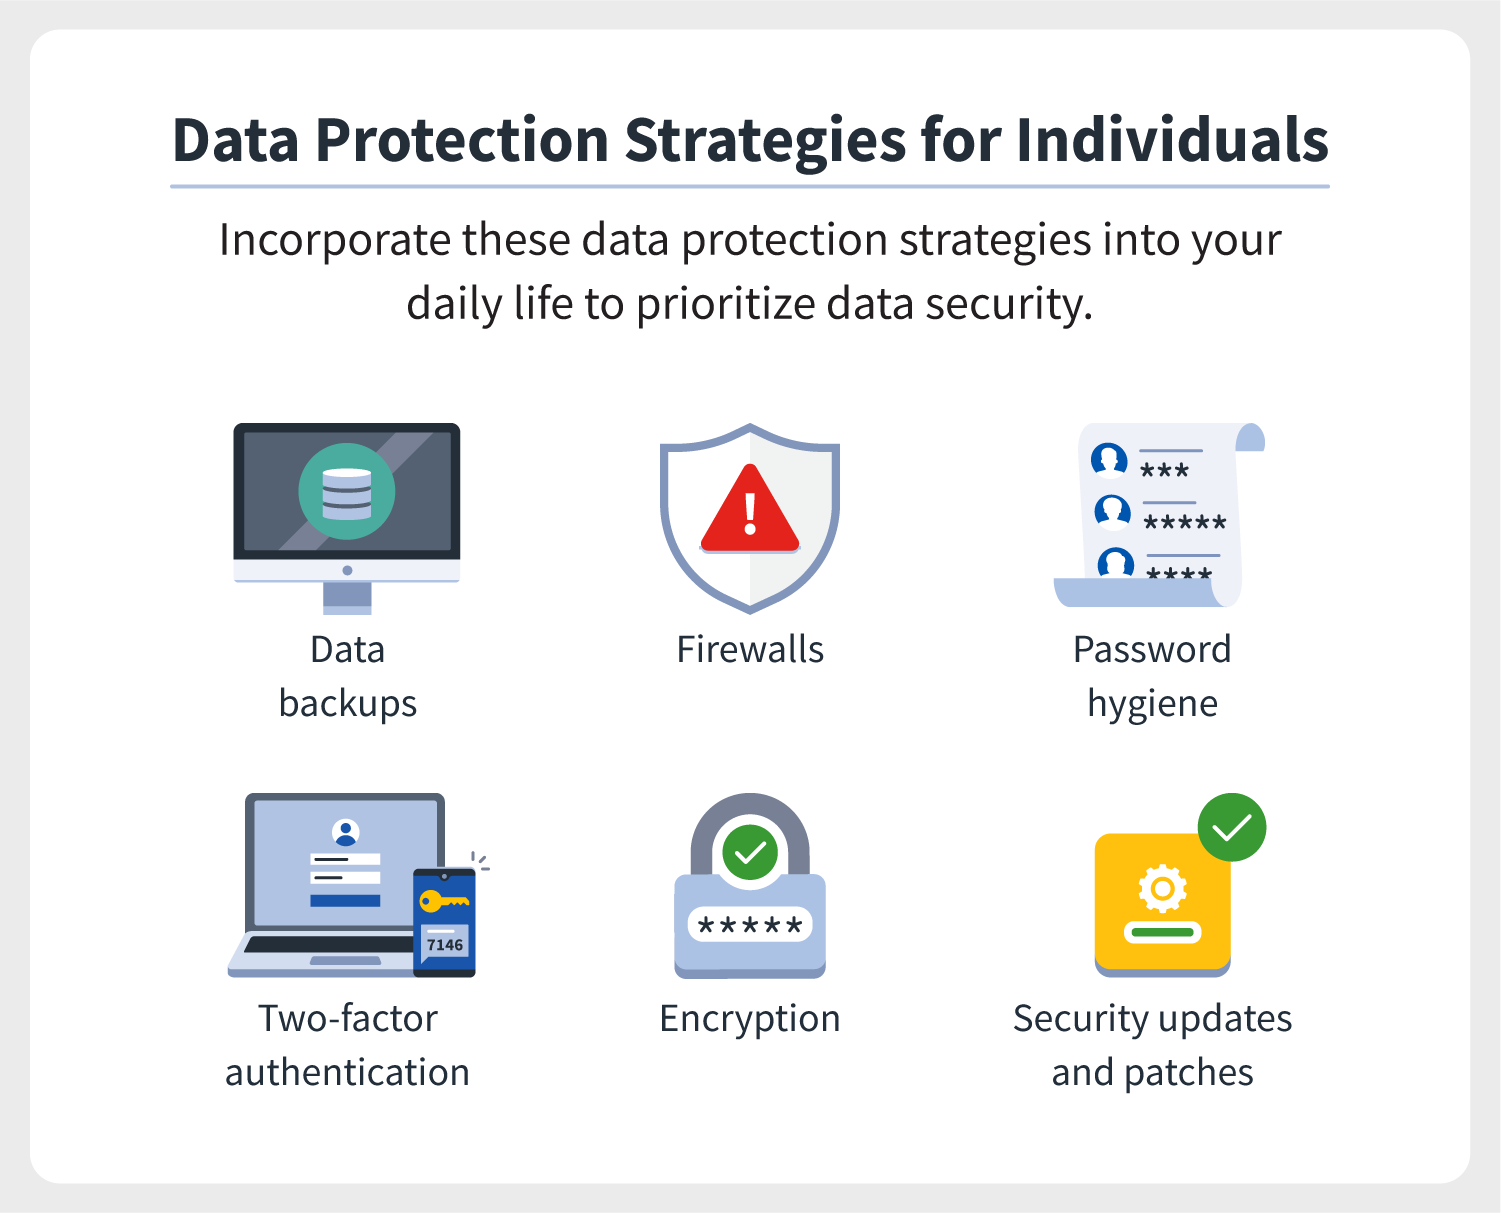 Six illustrations accompany data protection strategies for individuals.  